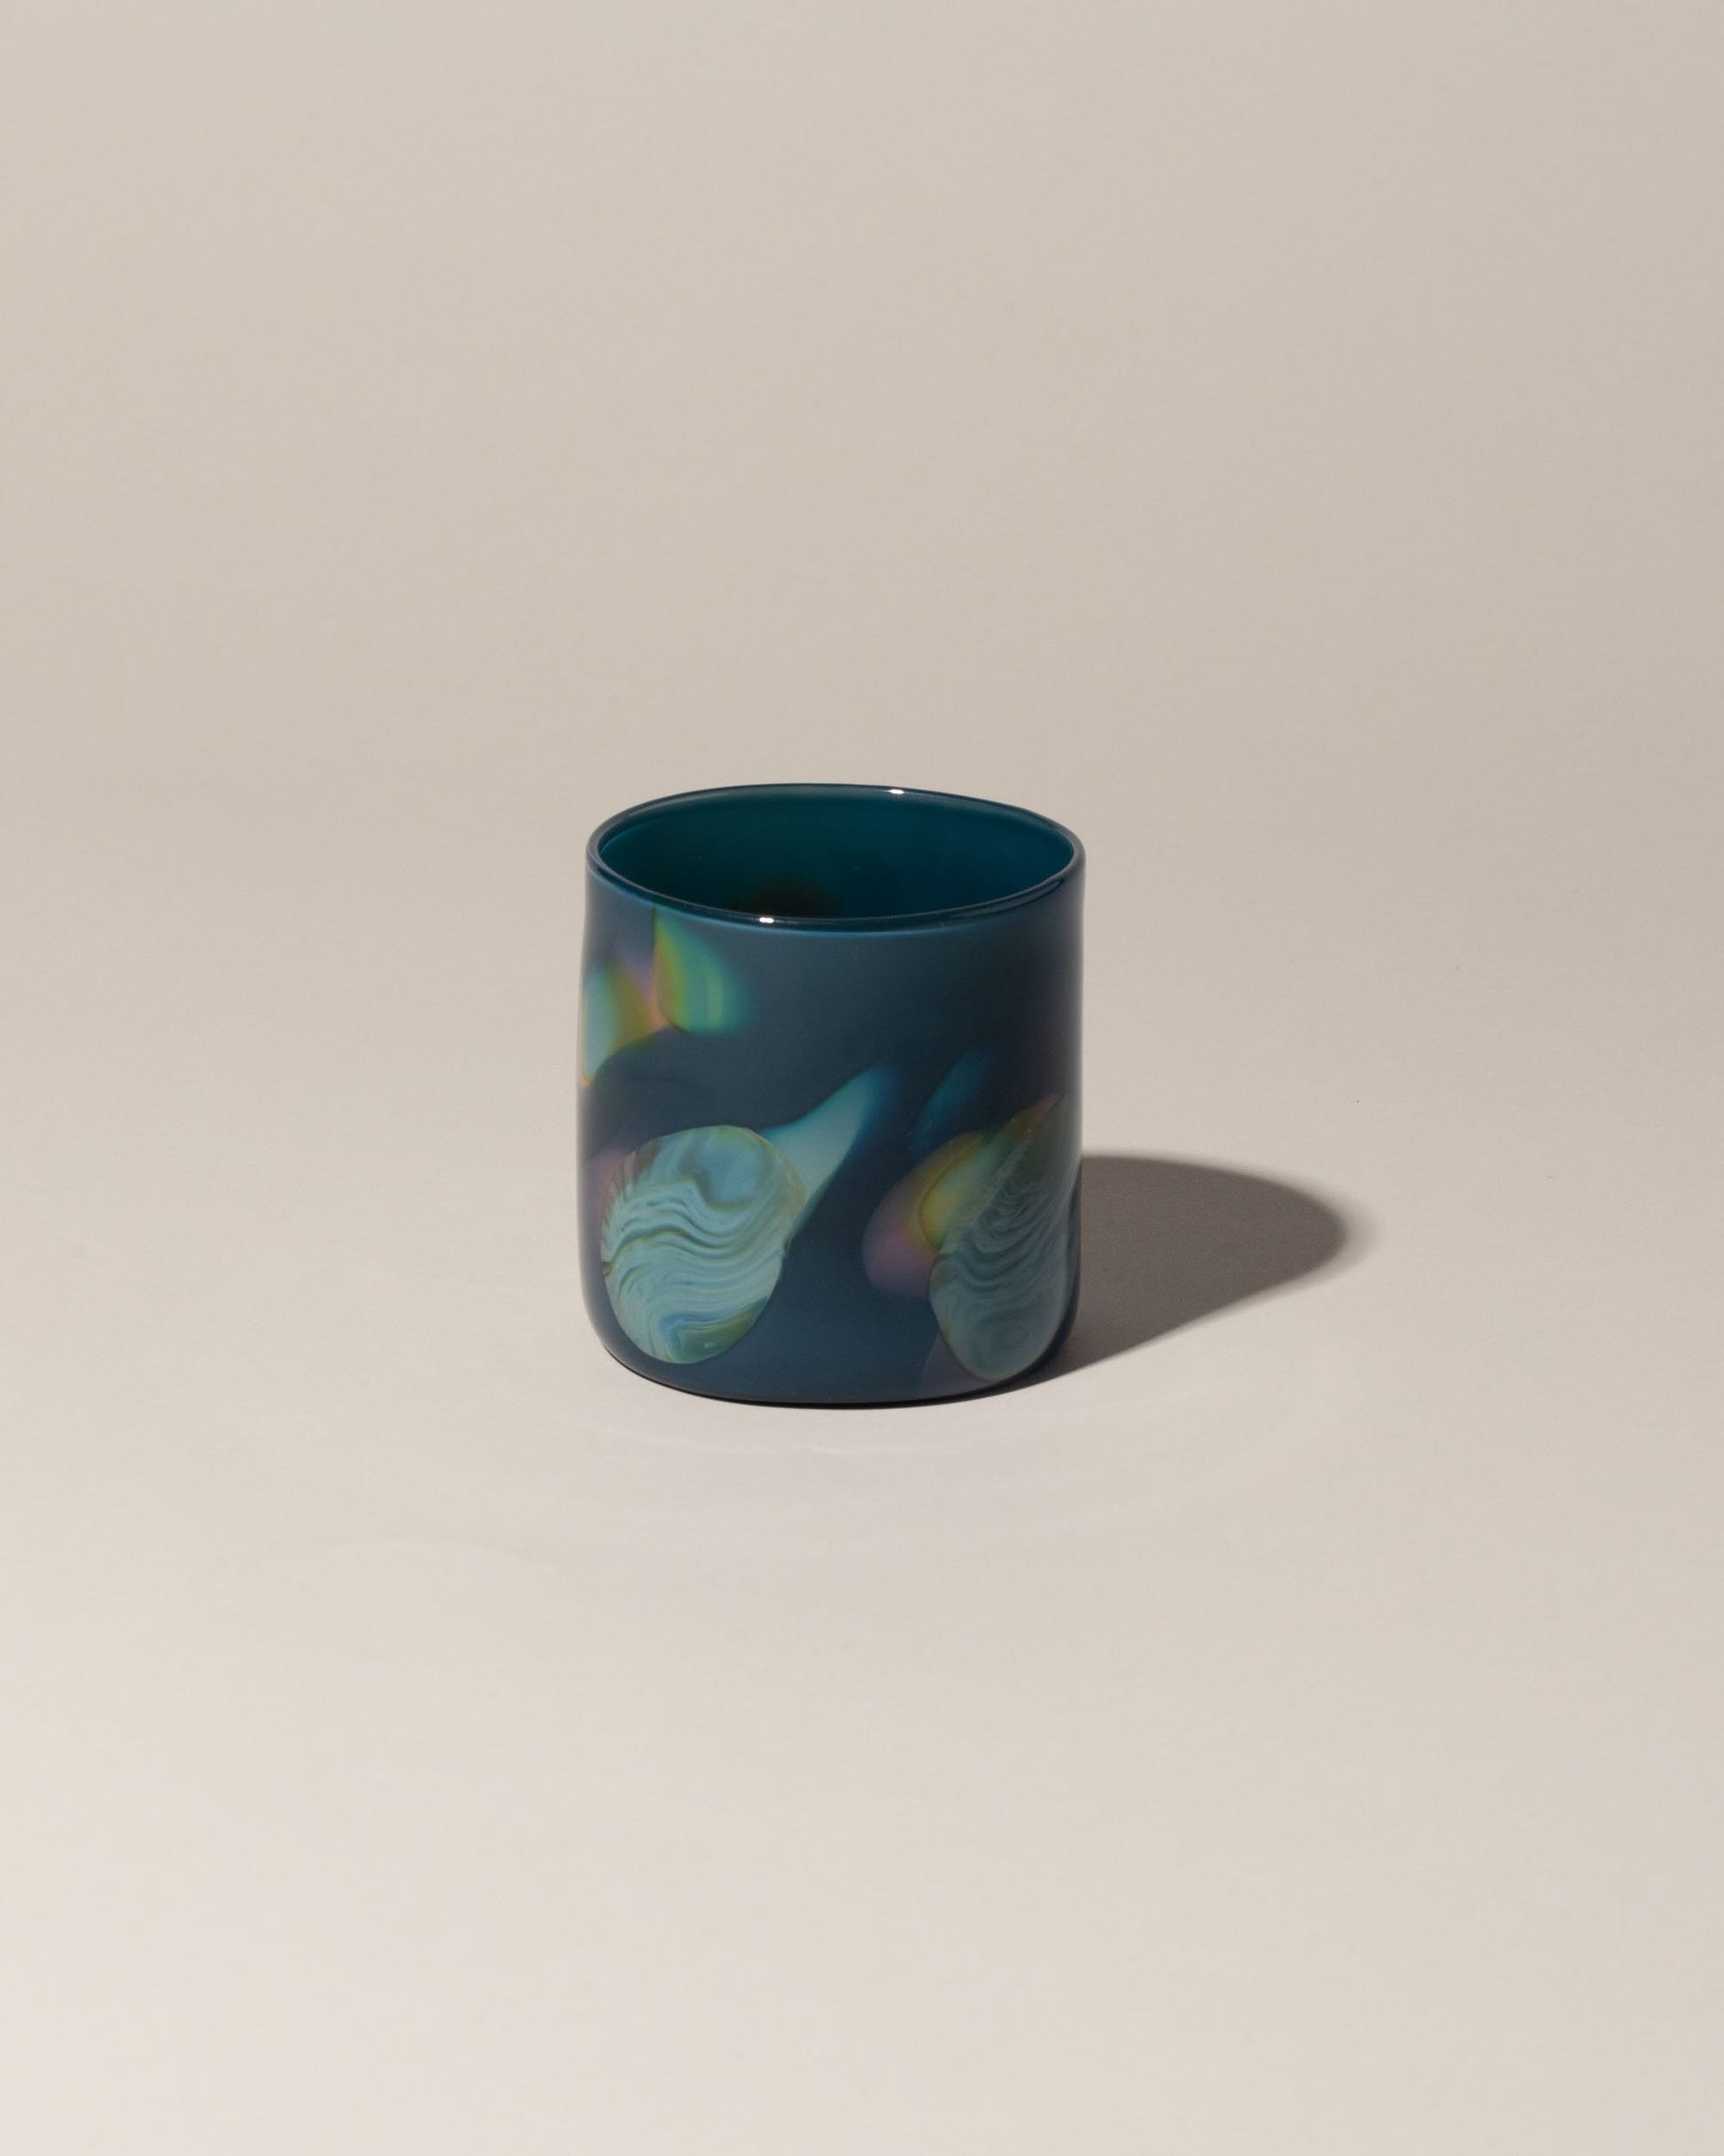 BaleFire Glass Ocean Floor Epiphany Cup on light color background.